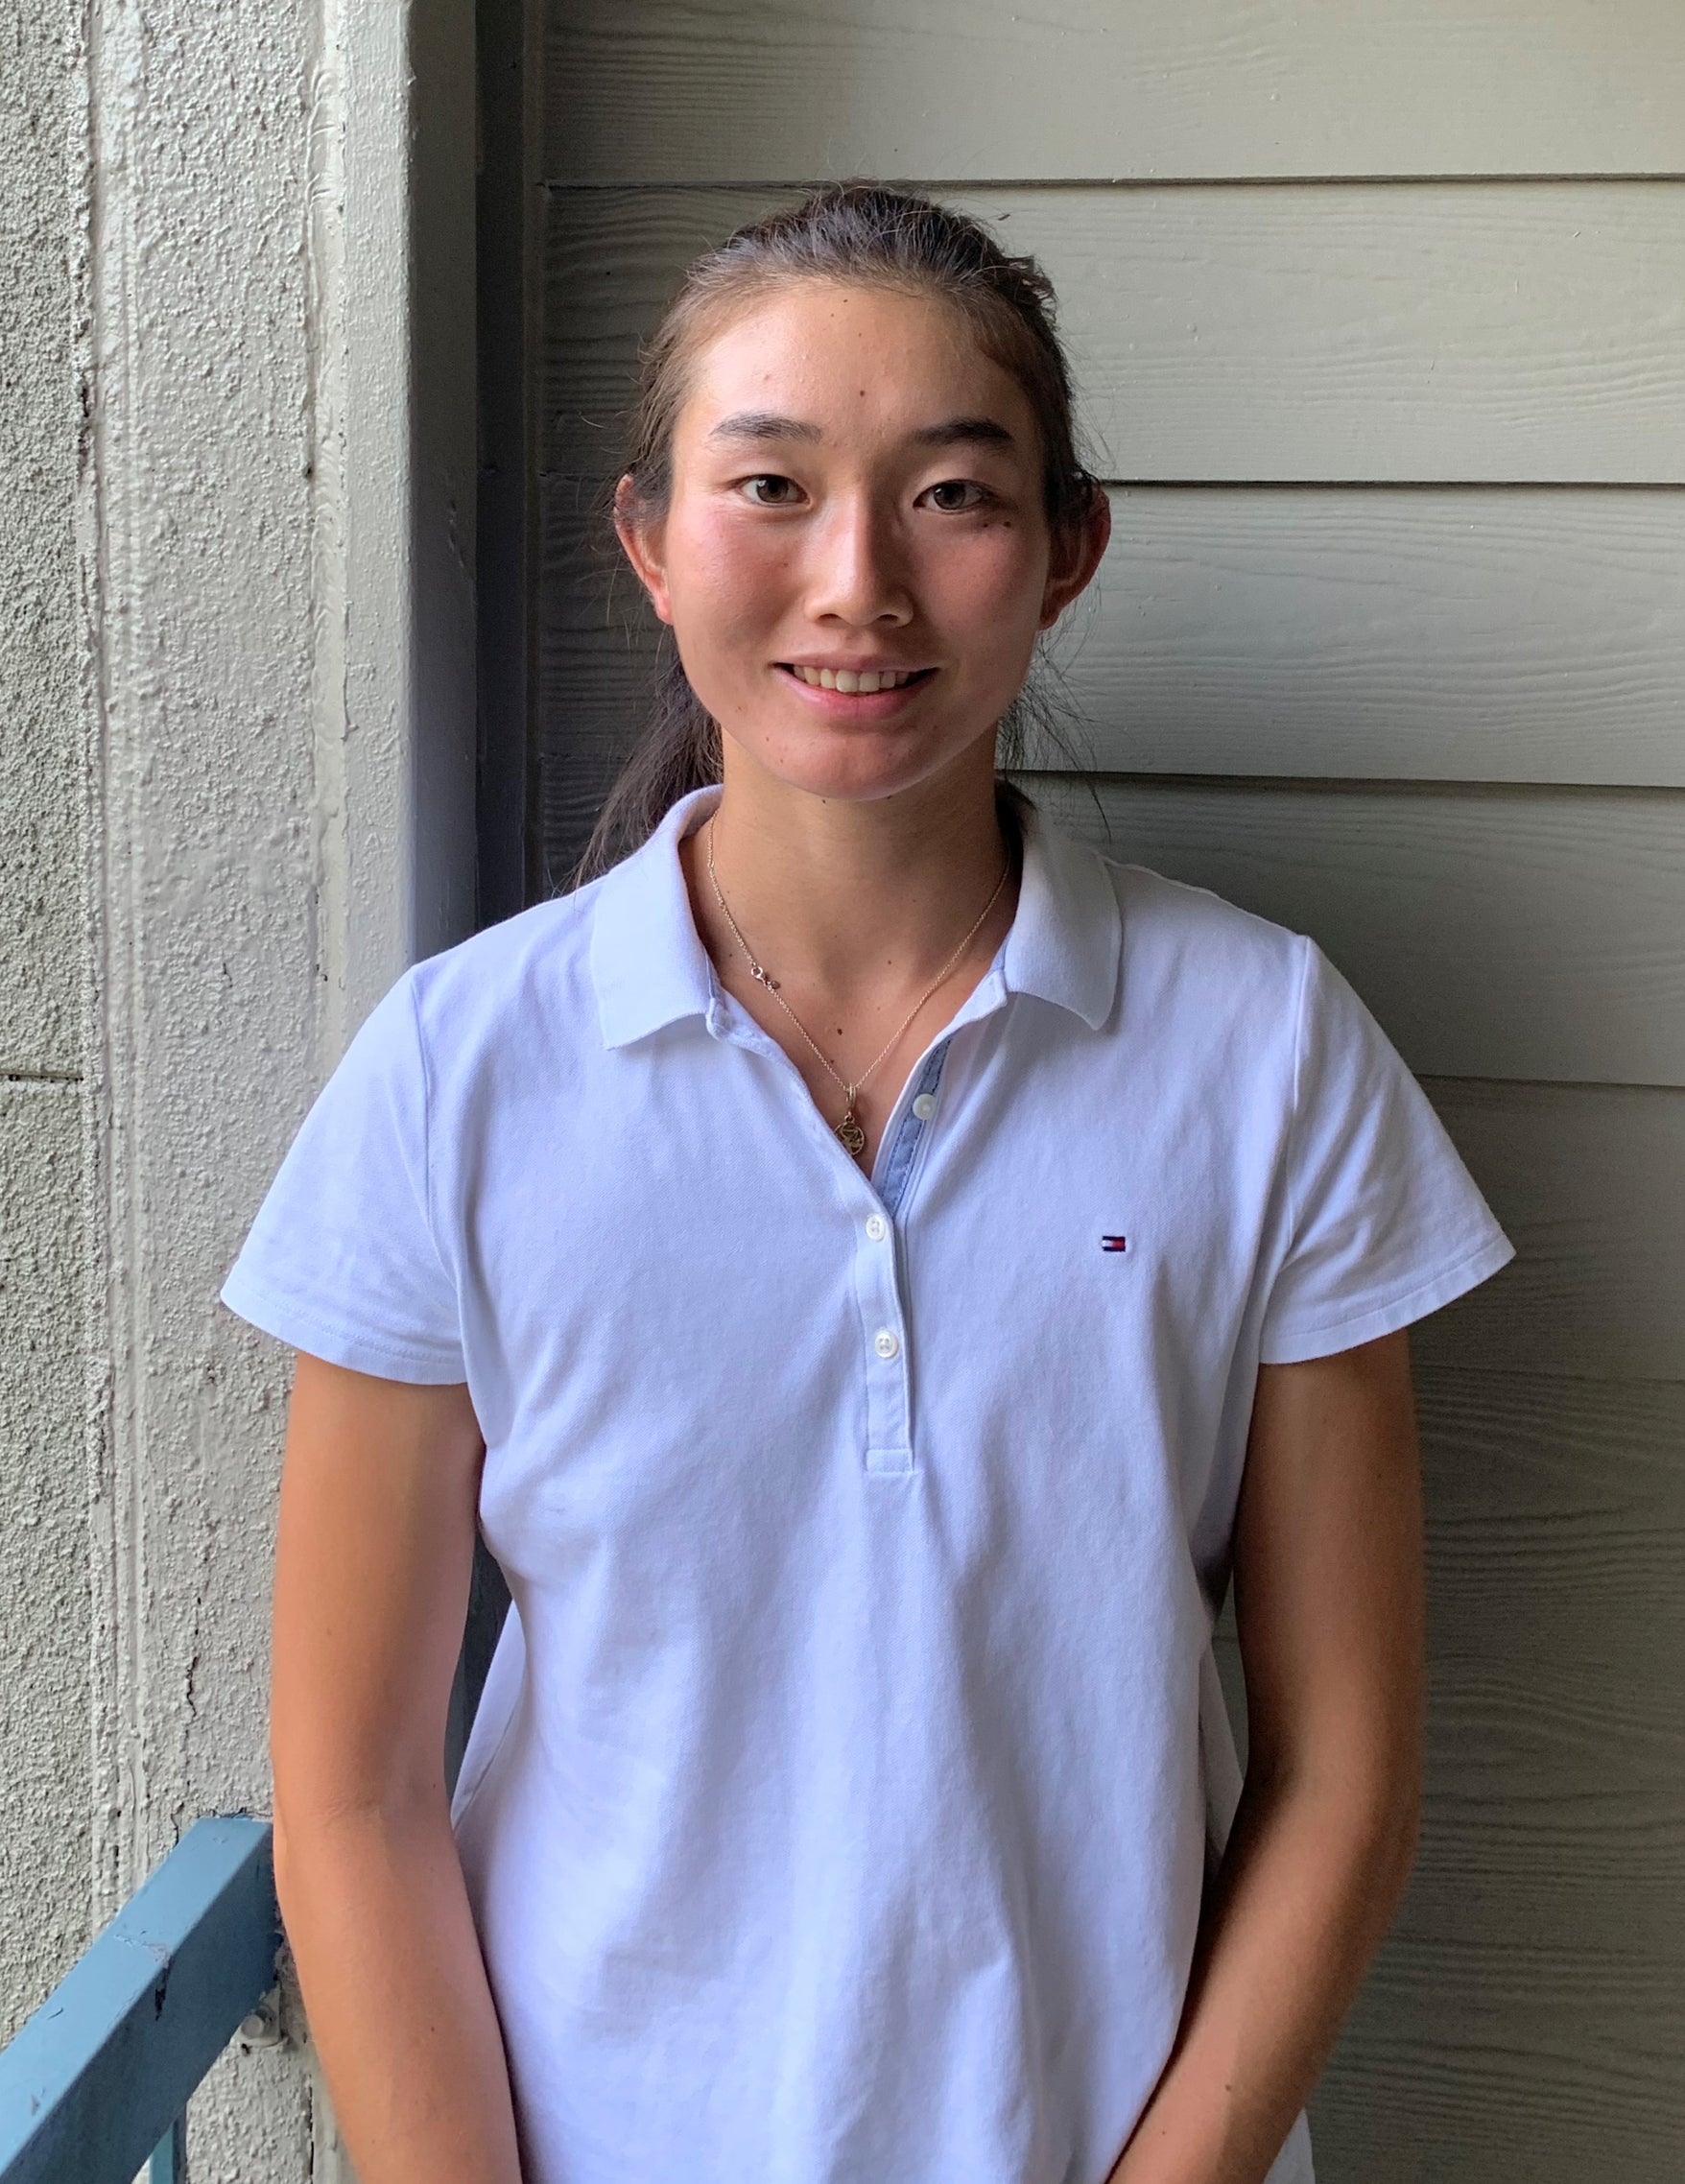 Linda Huang '21 interned with Star Innovations